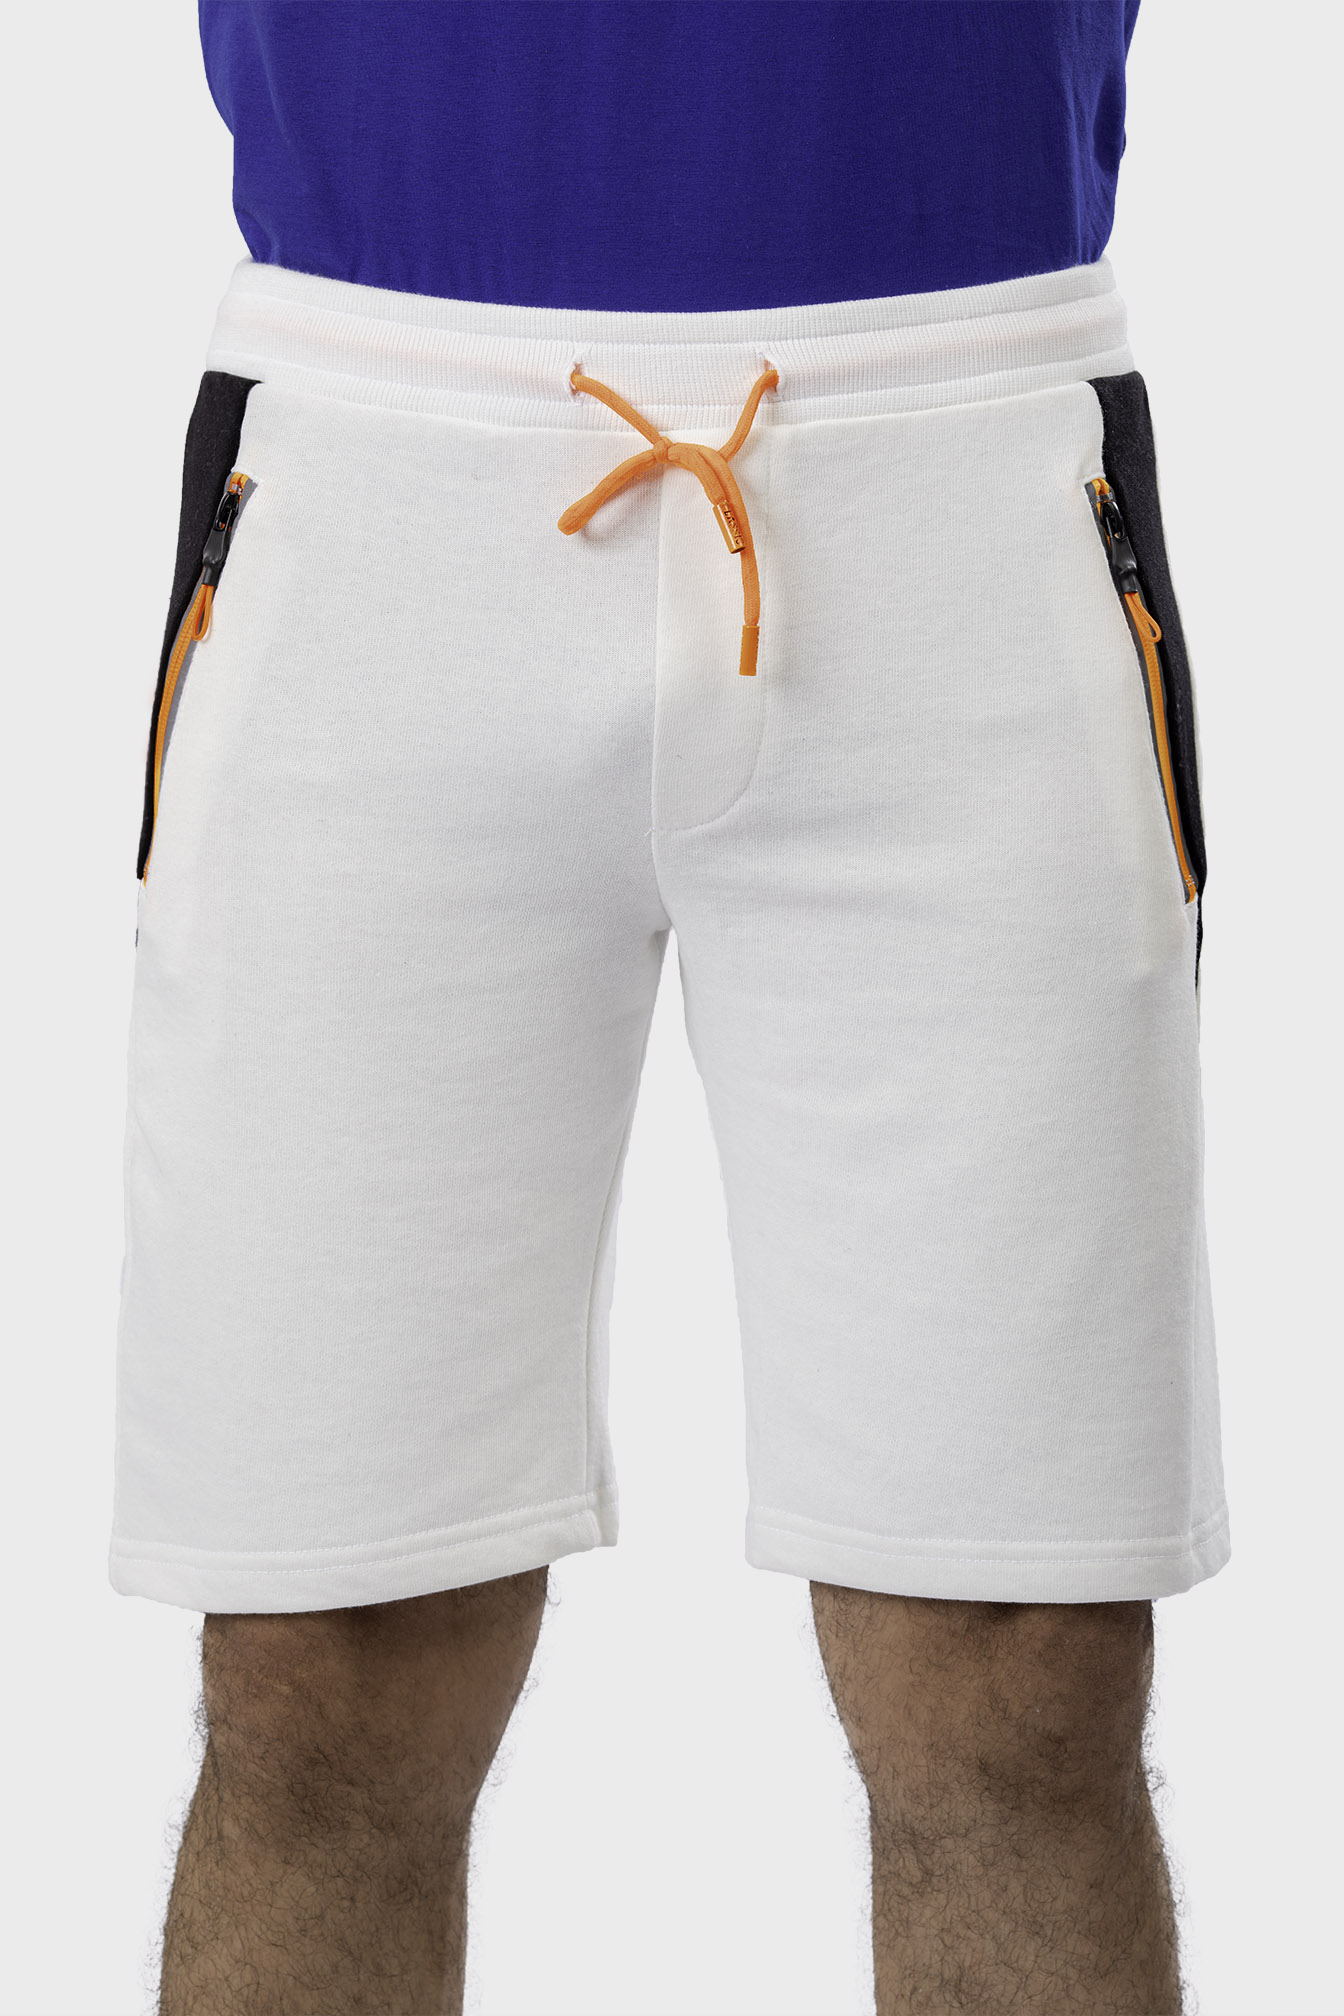 New Fit Melton Short Off White - TIE HOUSE